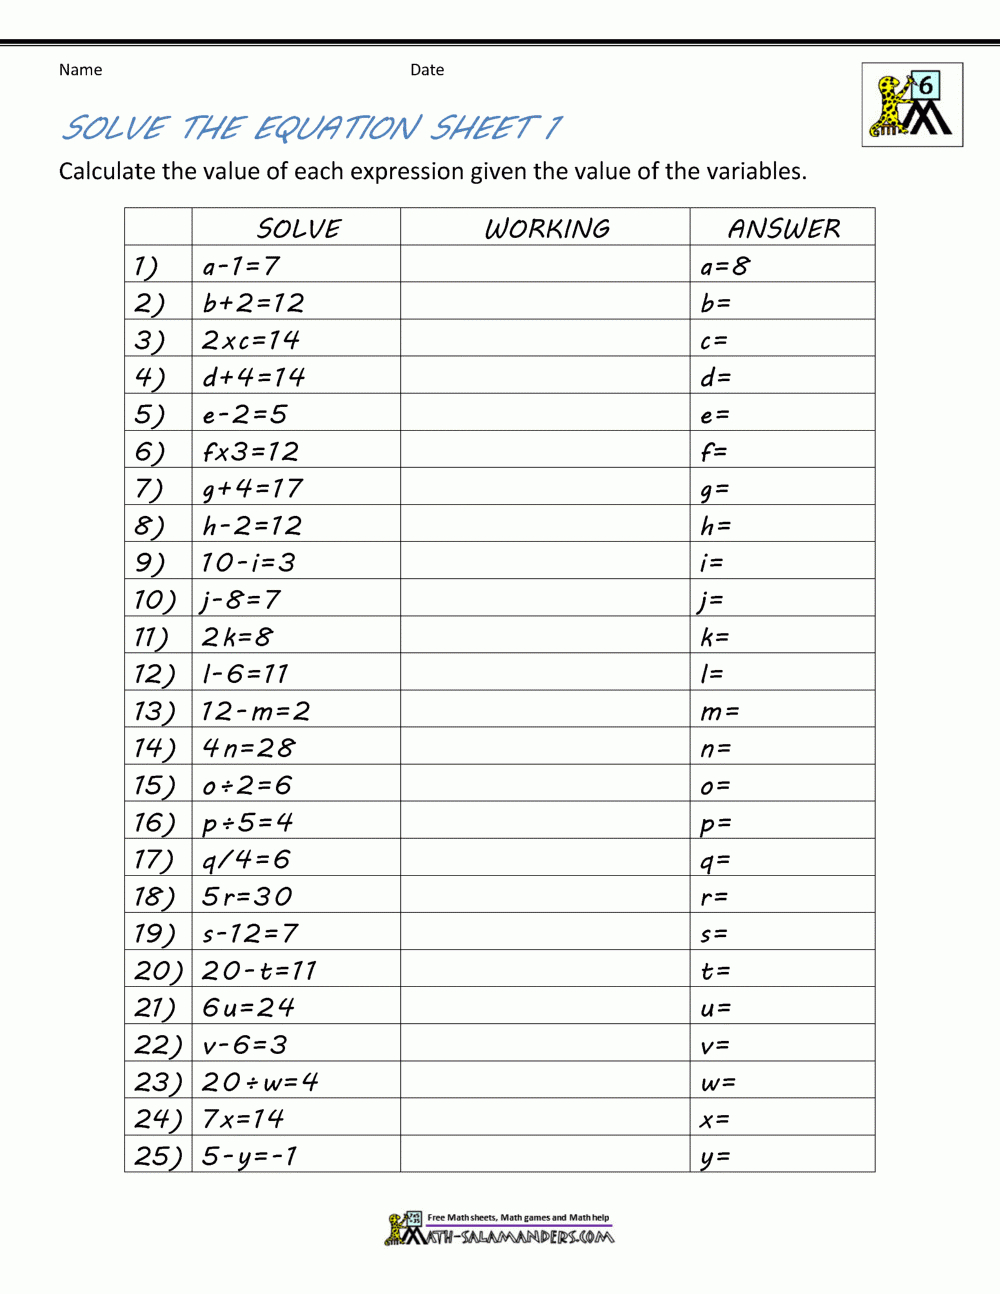 Online Math Worksheets That Are Printable For Algebra 1